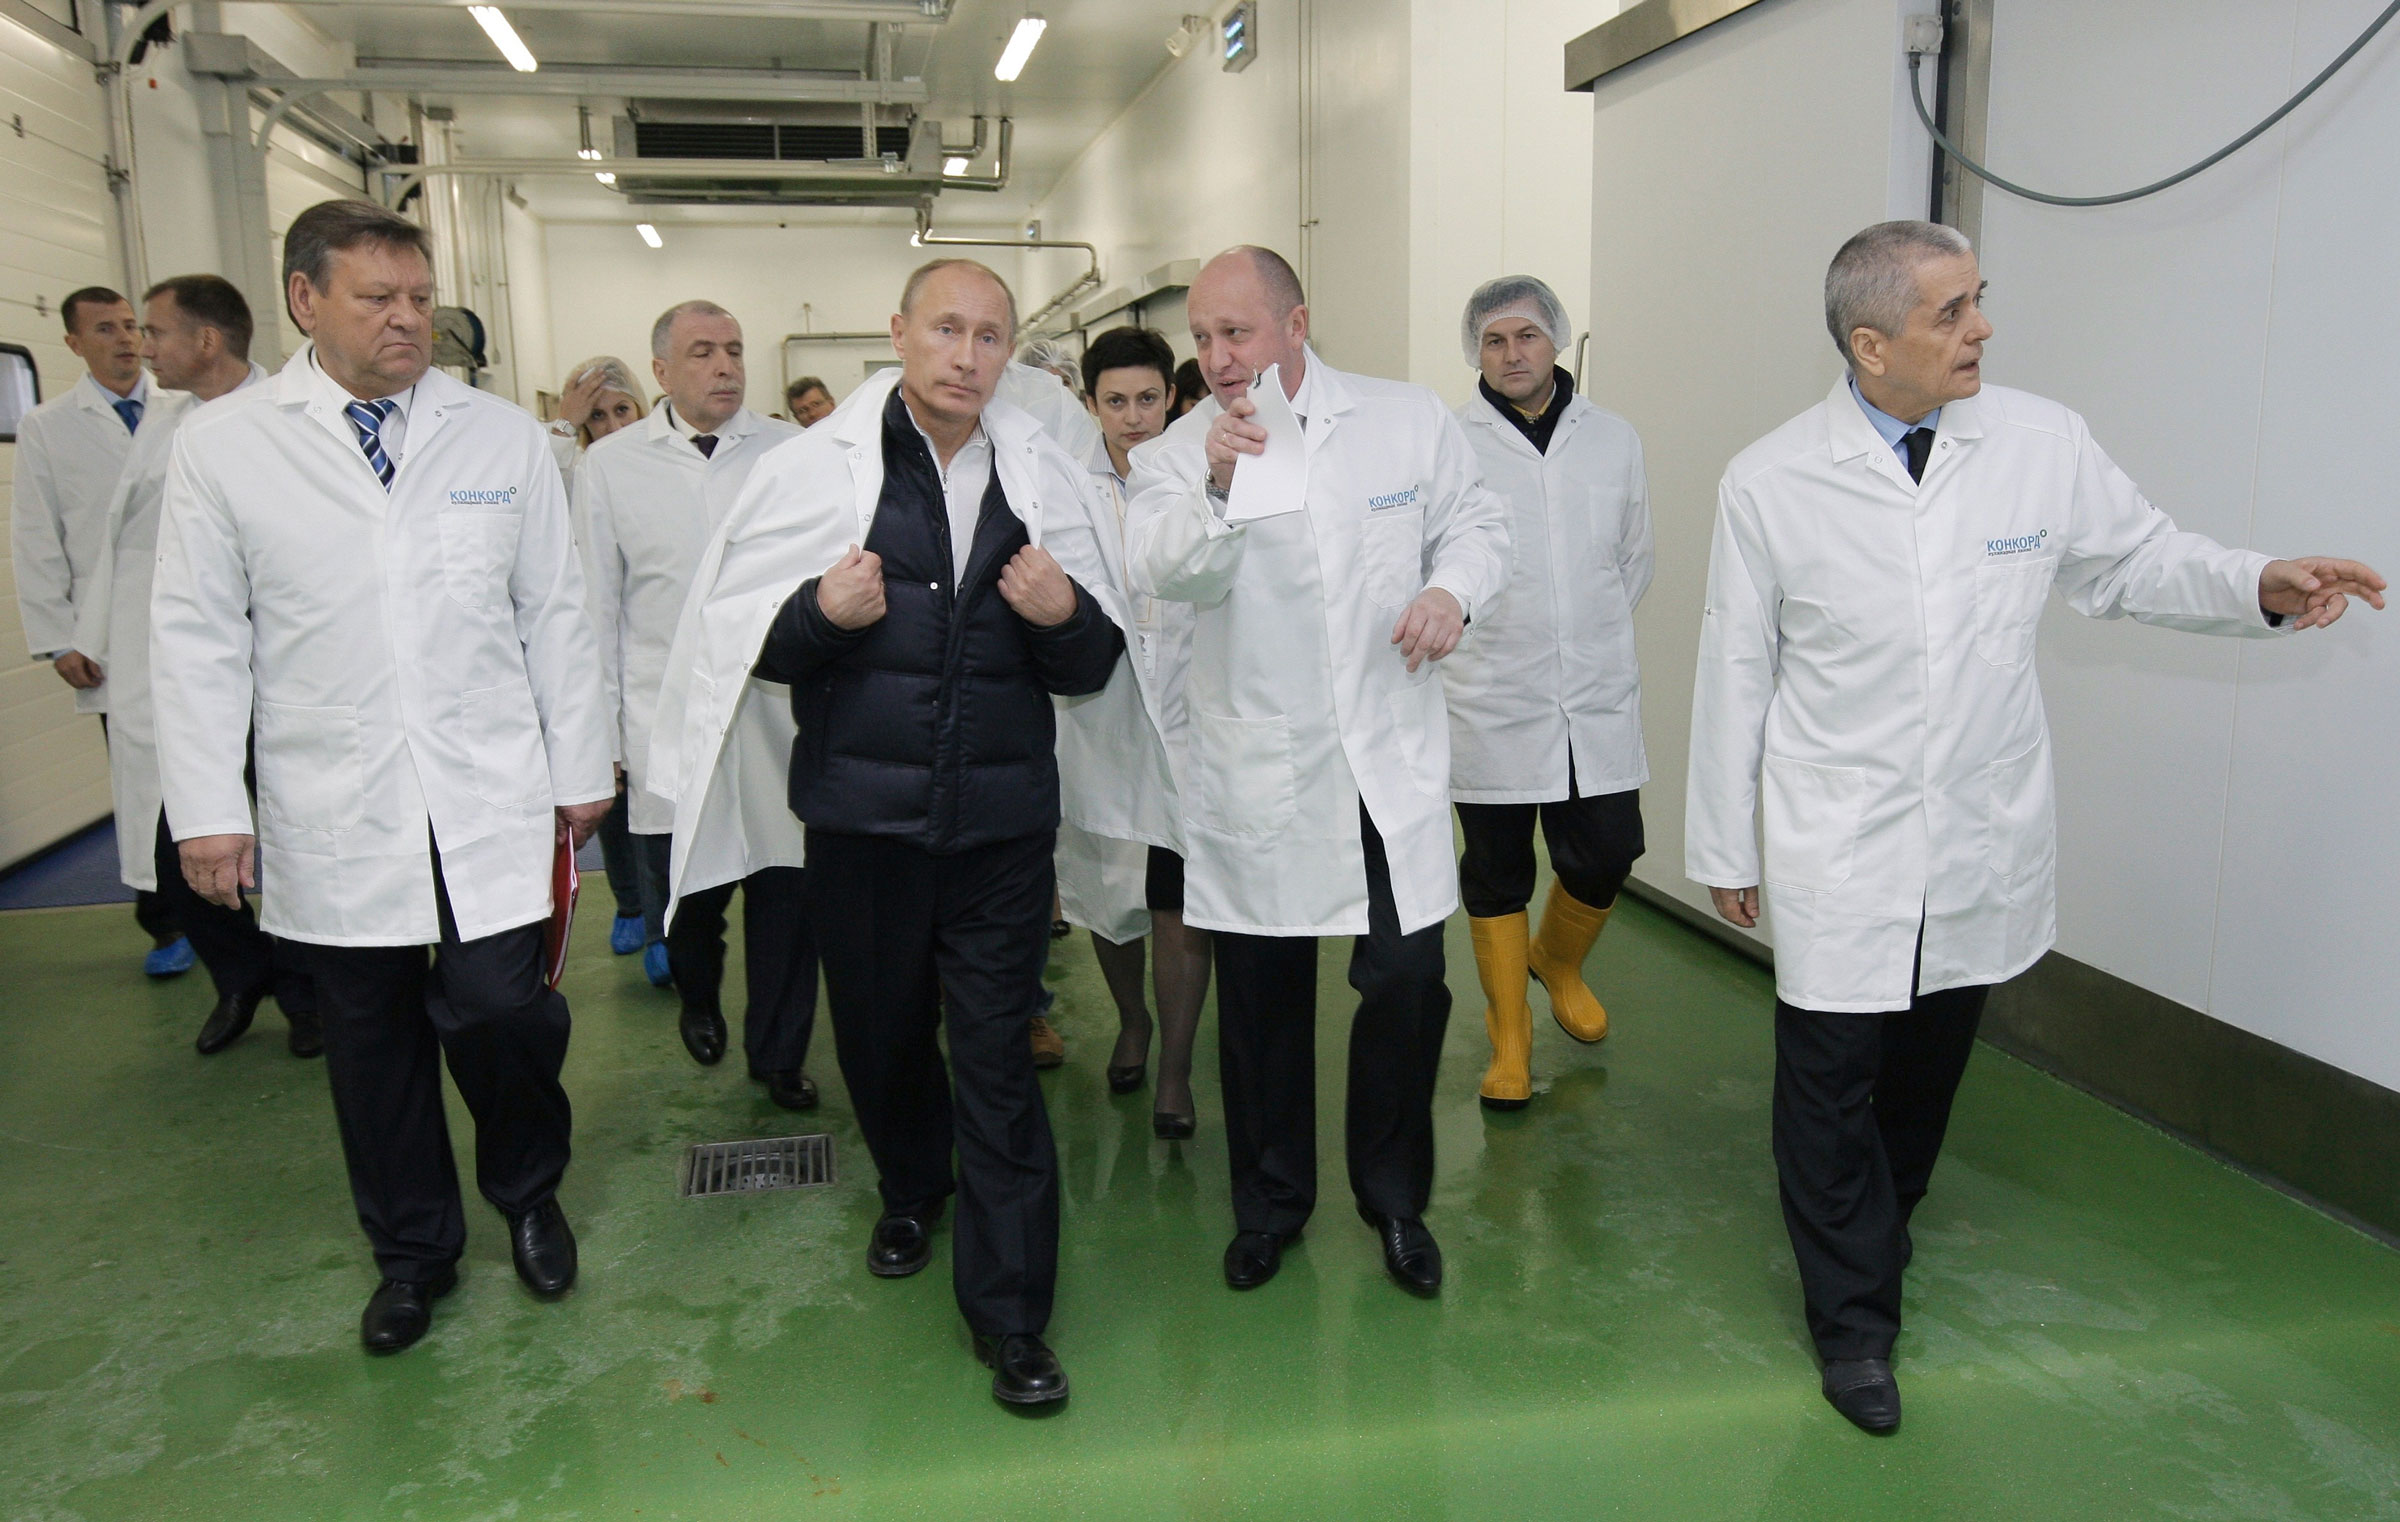 Yevgeny Prigozhin and Vladimir Putin wearing white lab coats and standing with a group of men as they tour a factory in 2010